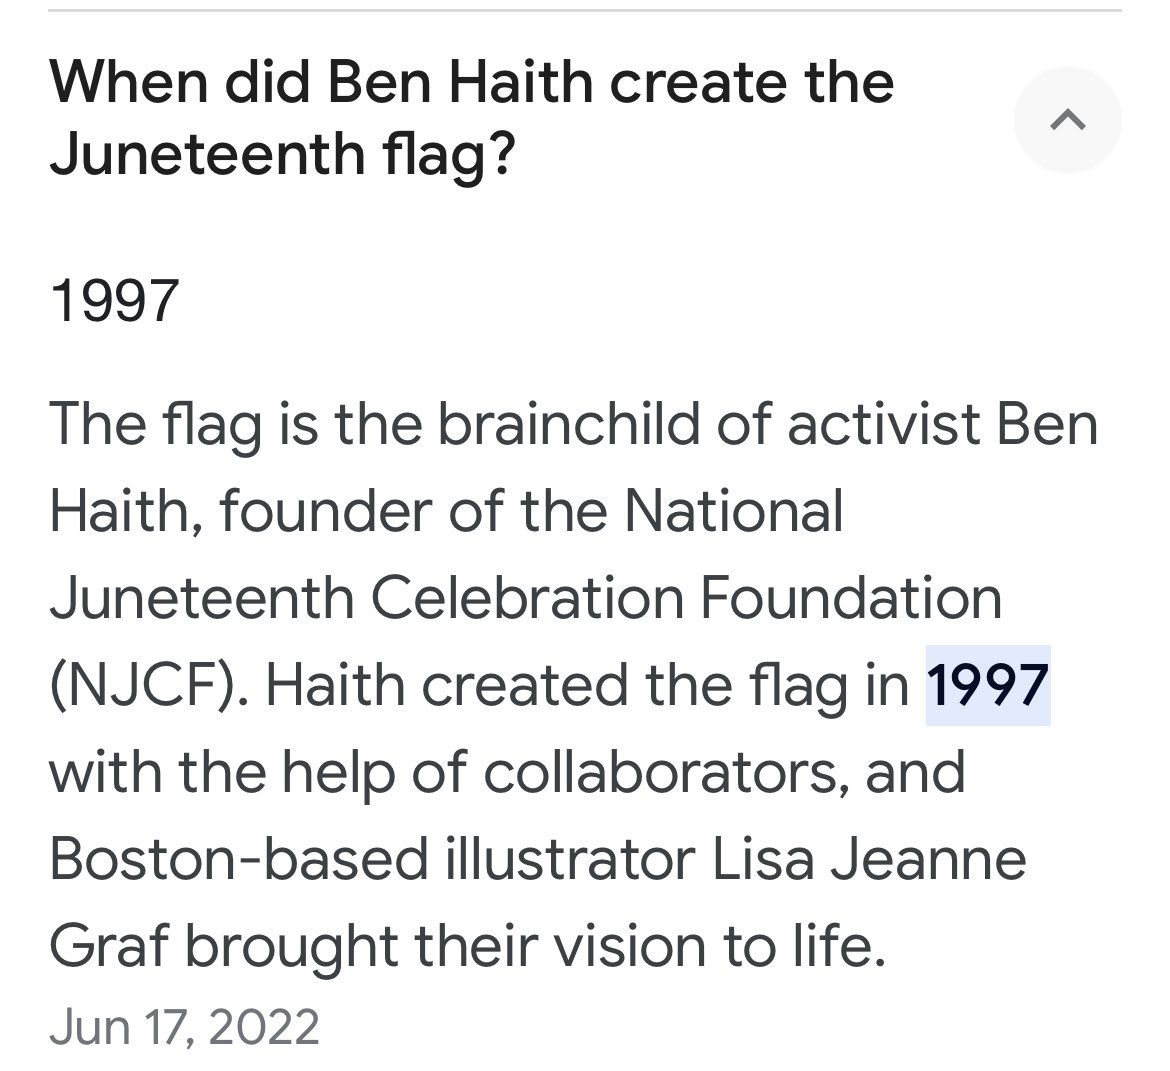 This beautiful Black Man, BEN HAITH,b created the Juneteenth flag in 1997 #BlackAmerican #Delineation